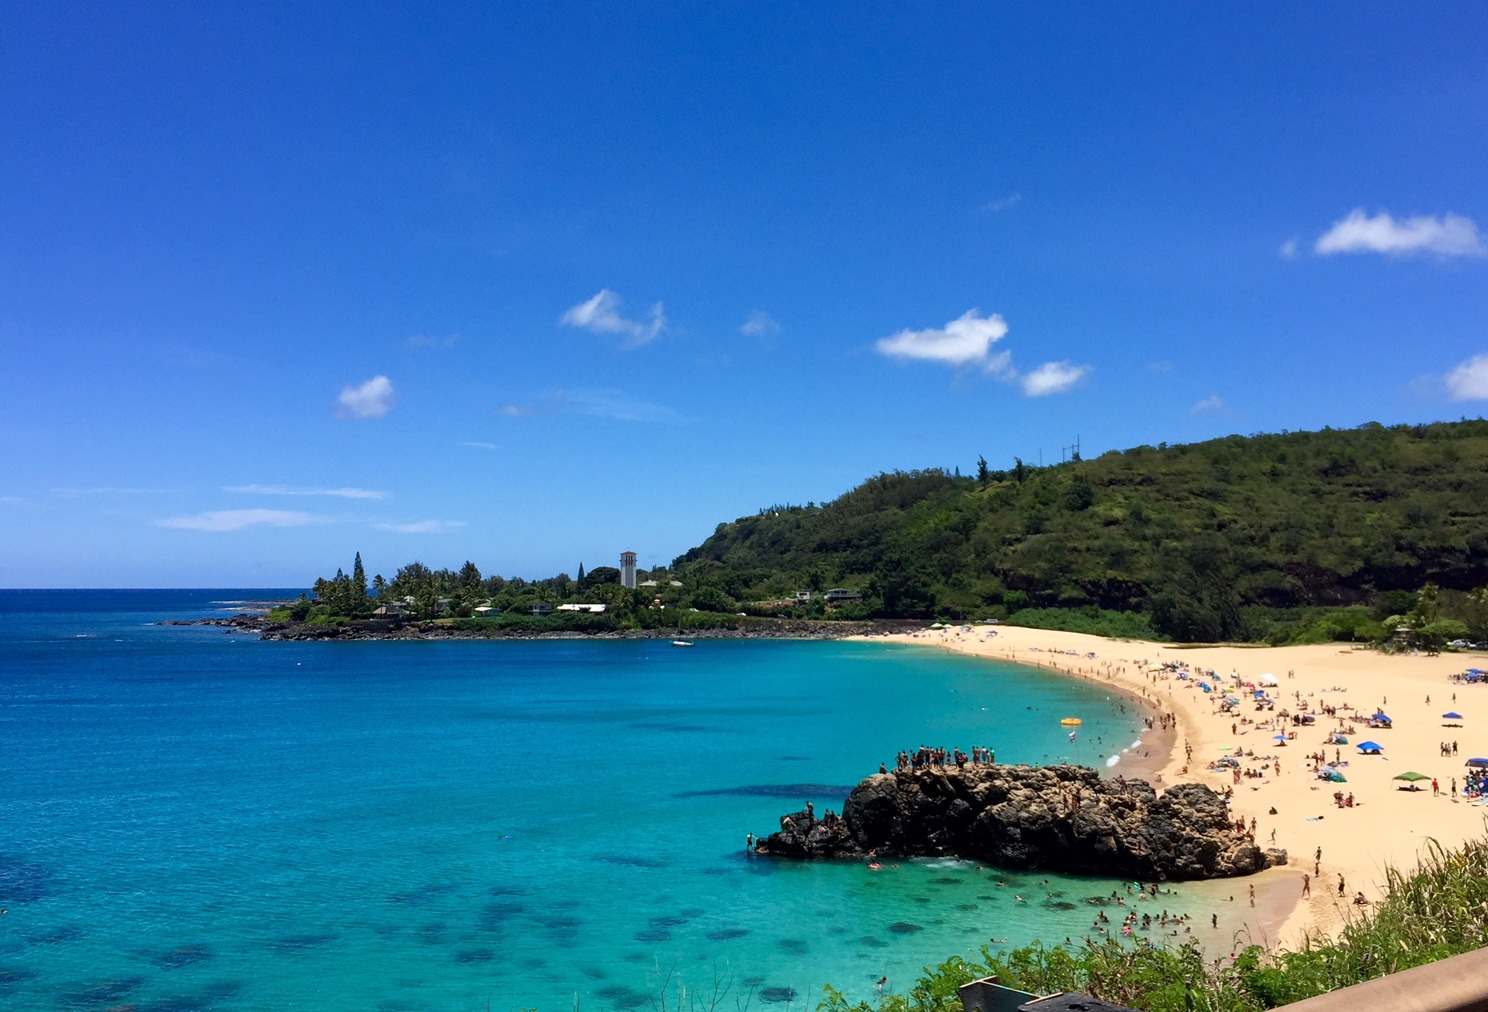 Top 5 Best Beaches On Oahus North Shore Hawaii Real Estate Market And Trends Hawaii Life